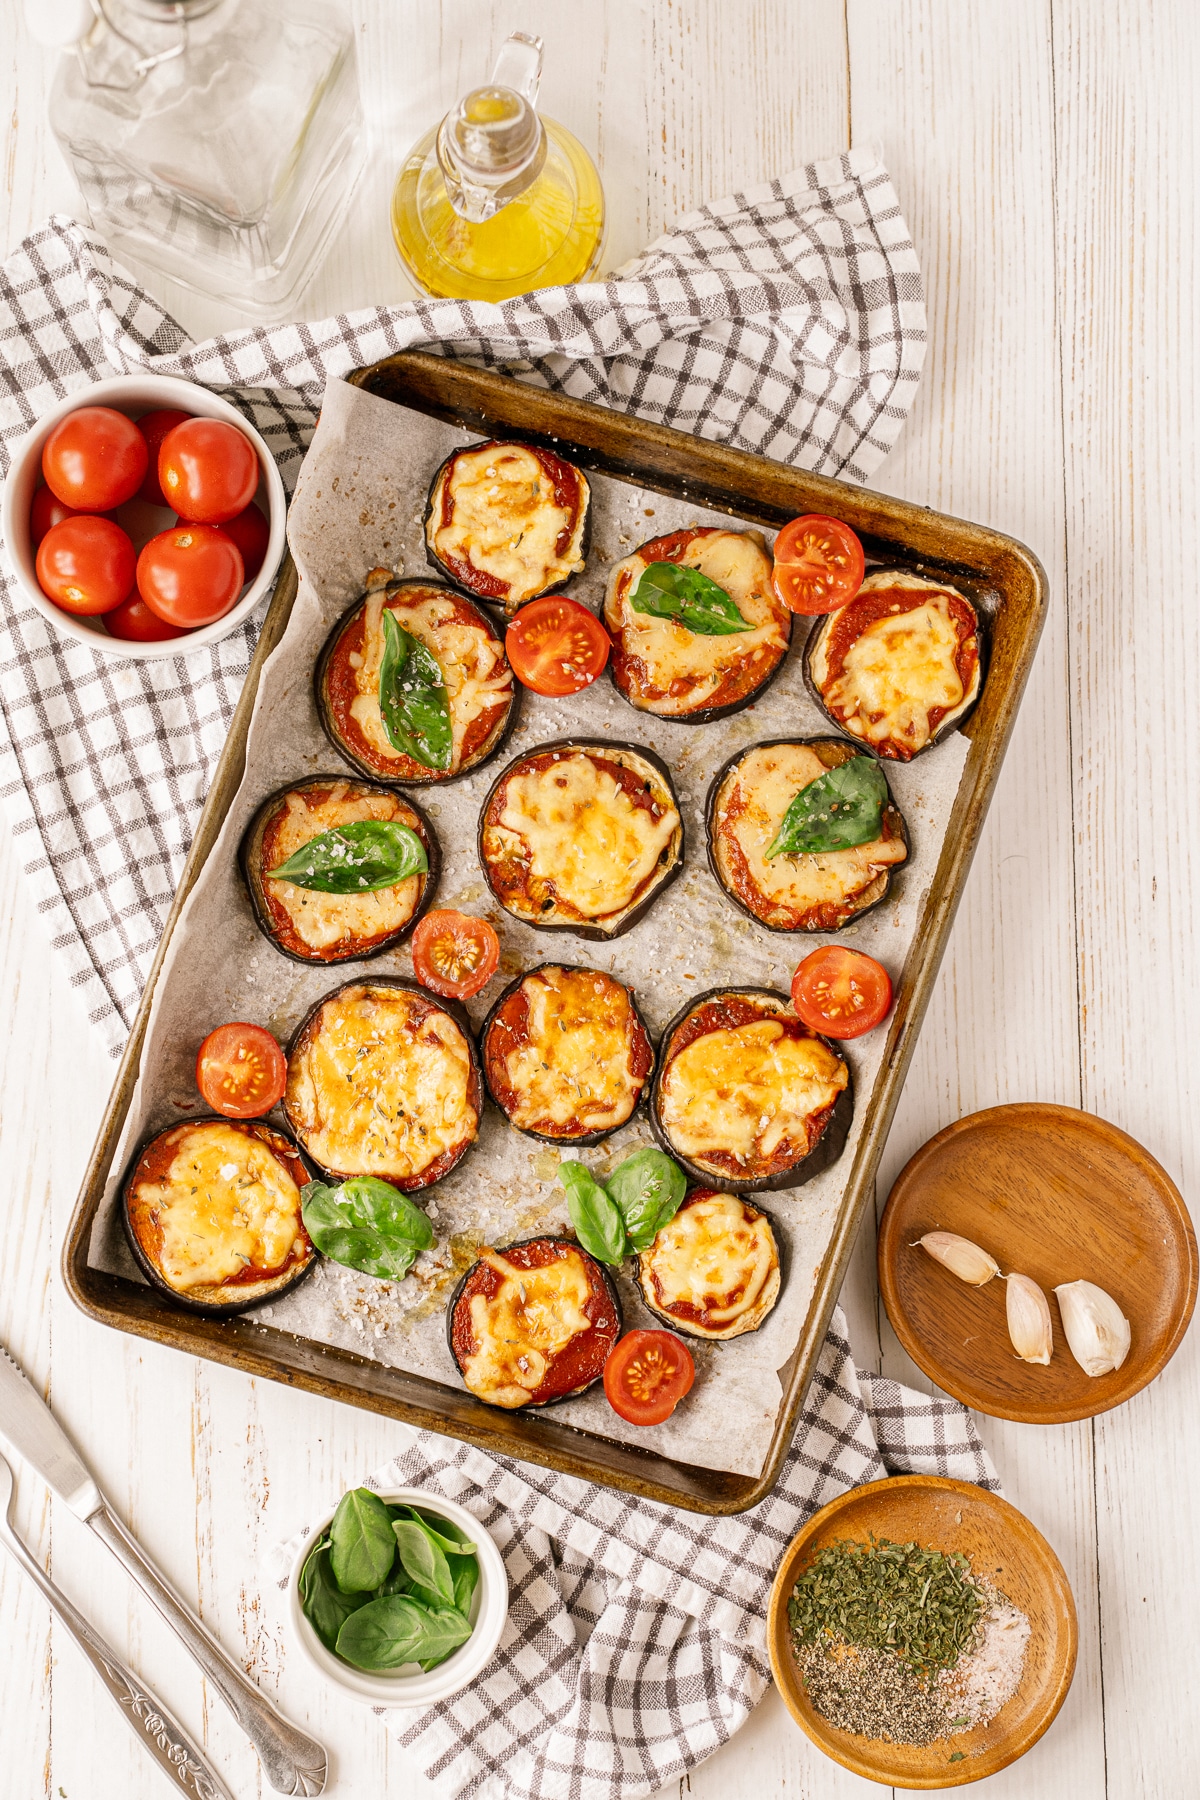 Overhead picture of eggplant parmesan on a baking sheet lined with parchment paper on a checkered towel with a small white bowl of tomatoes in the upper left and a small wooden plate of garlic cloves in the bottom right corner.